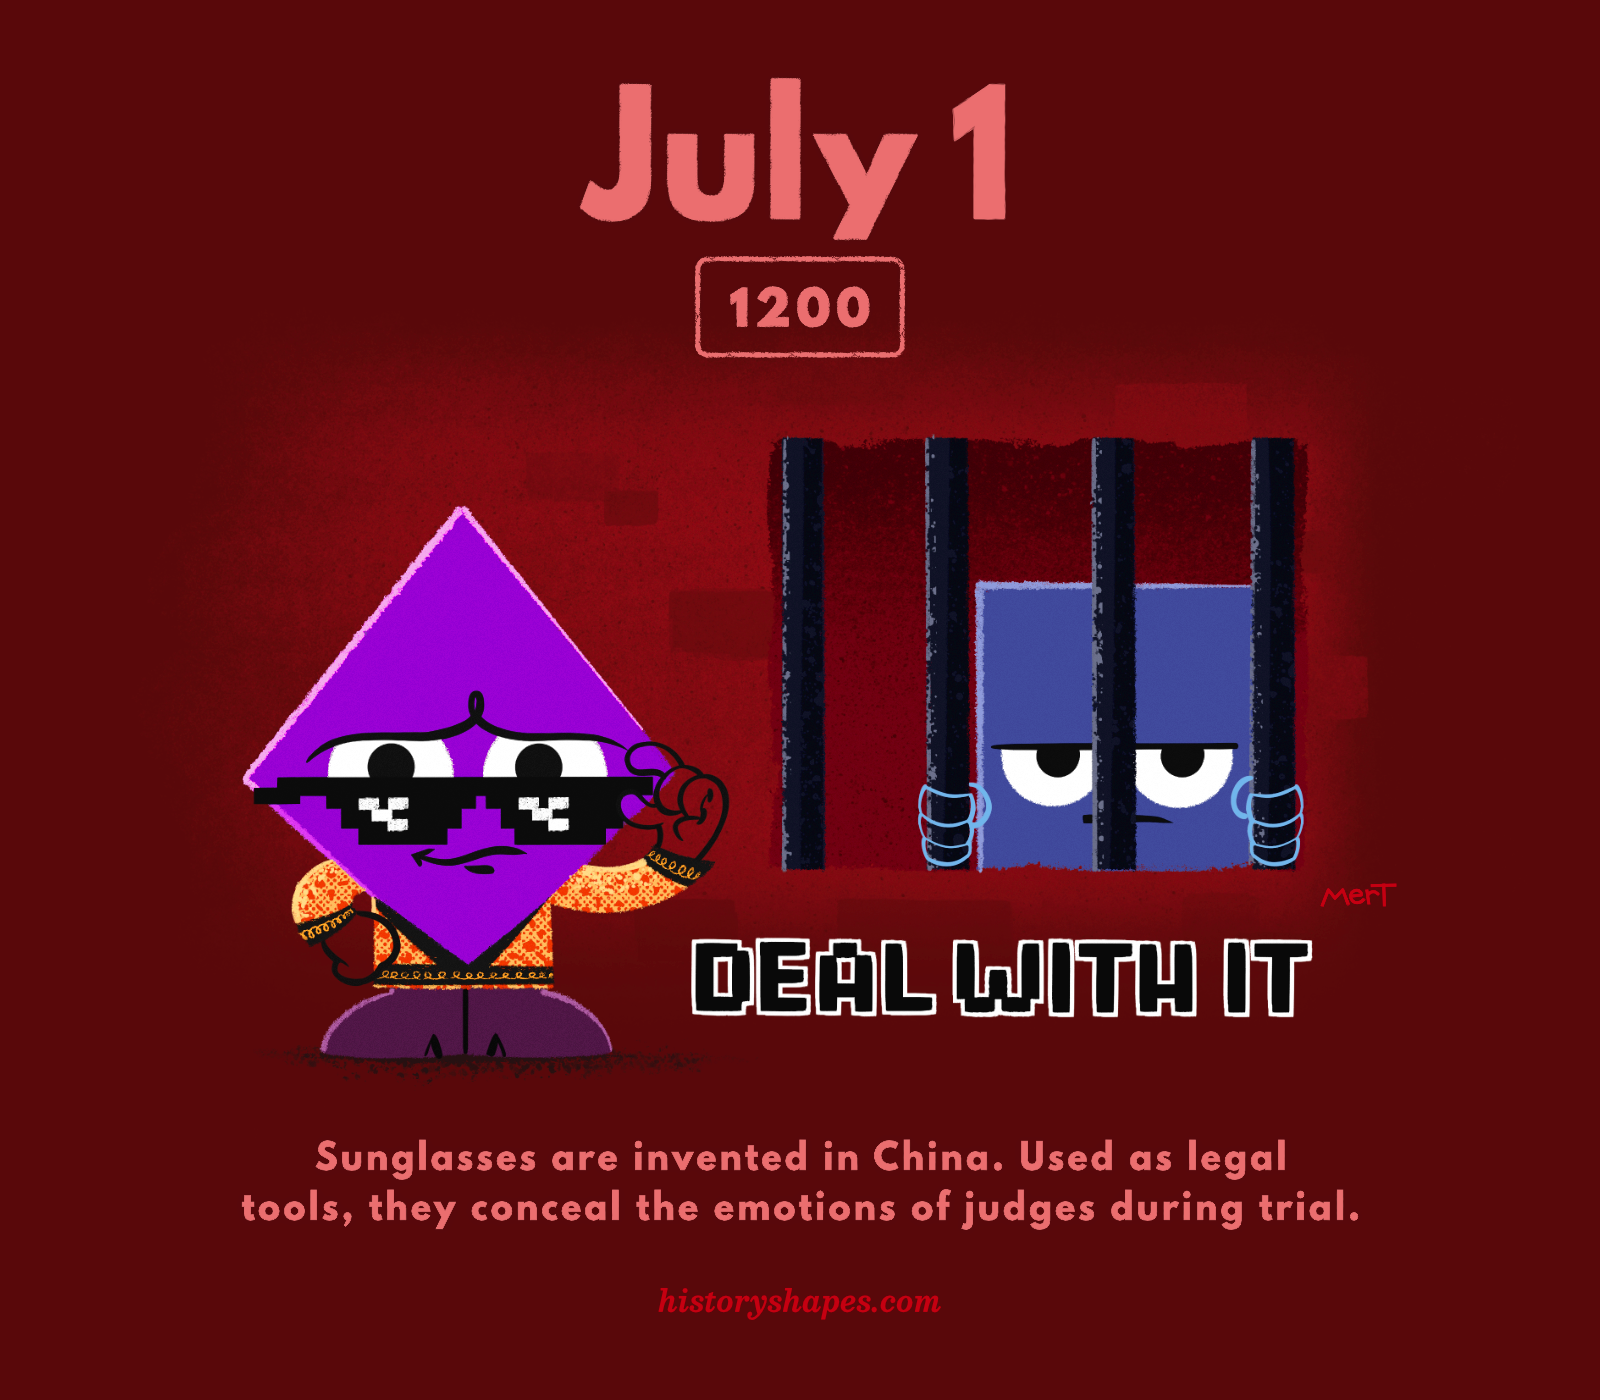 Dom, a purple diamond, is dressed as a Chinese judge with 8-bit sunglasses tipped below his eyes. Ray sits behind bars. "DEAL WITH IT" is written in an 8-bit font.